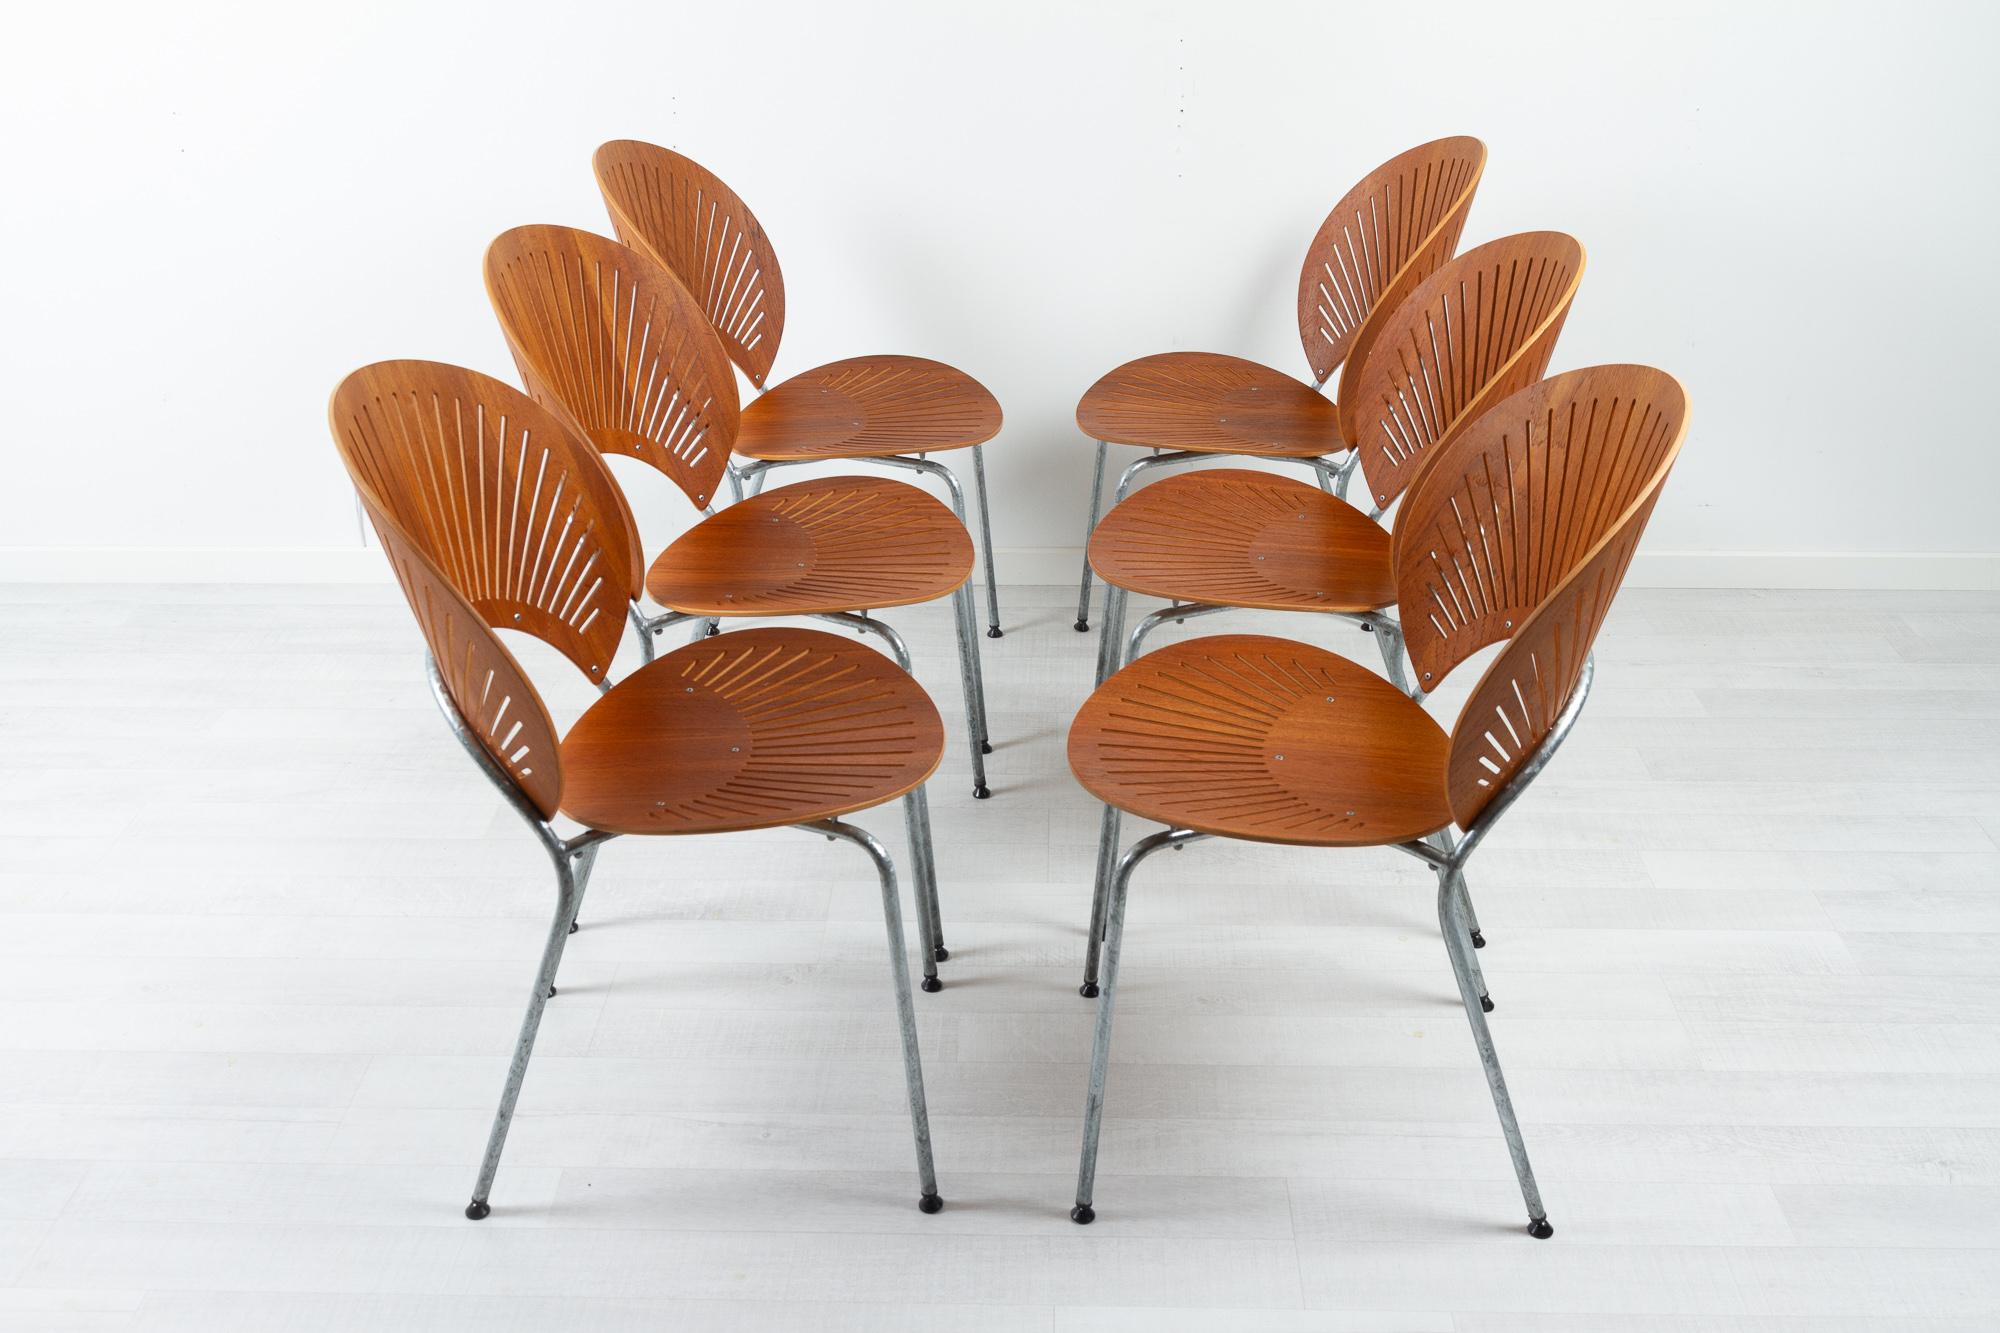 Trinidad Teak Dining Chairs by Nanna Ditzel 1990s Set of 6 For Sale 2